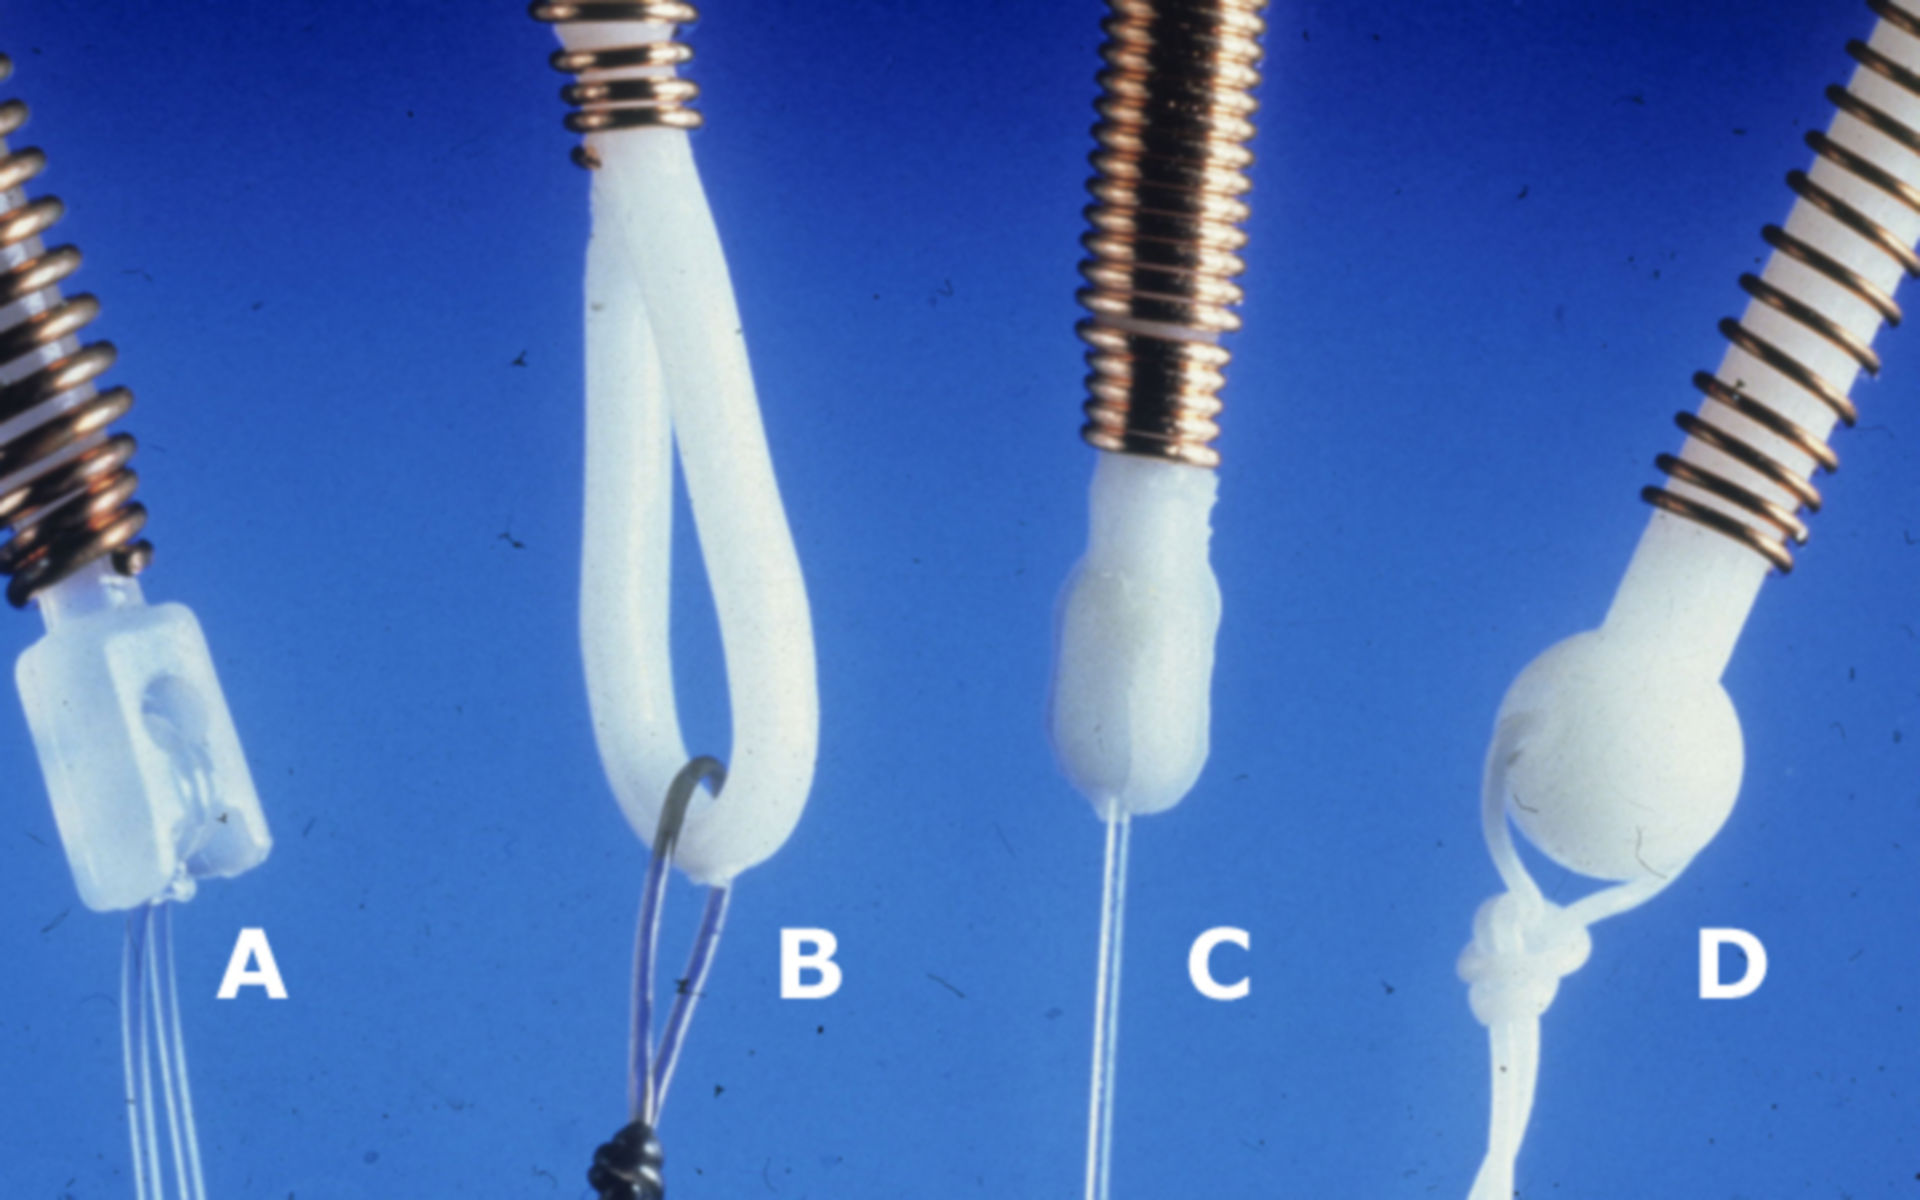 The “shaft to thread” connections of different IUD models.